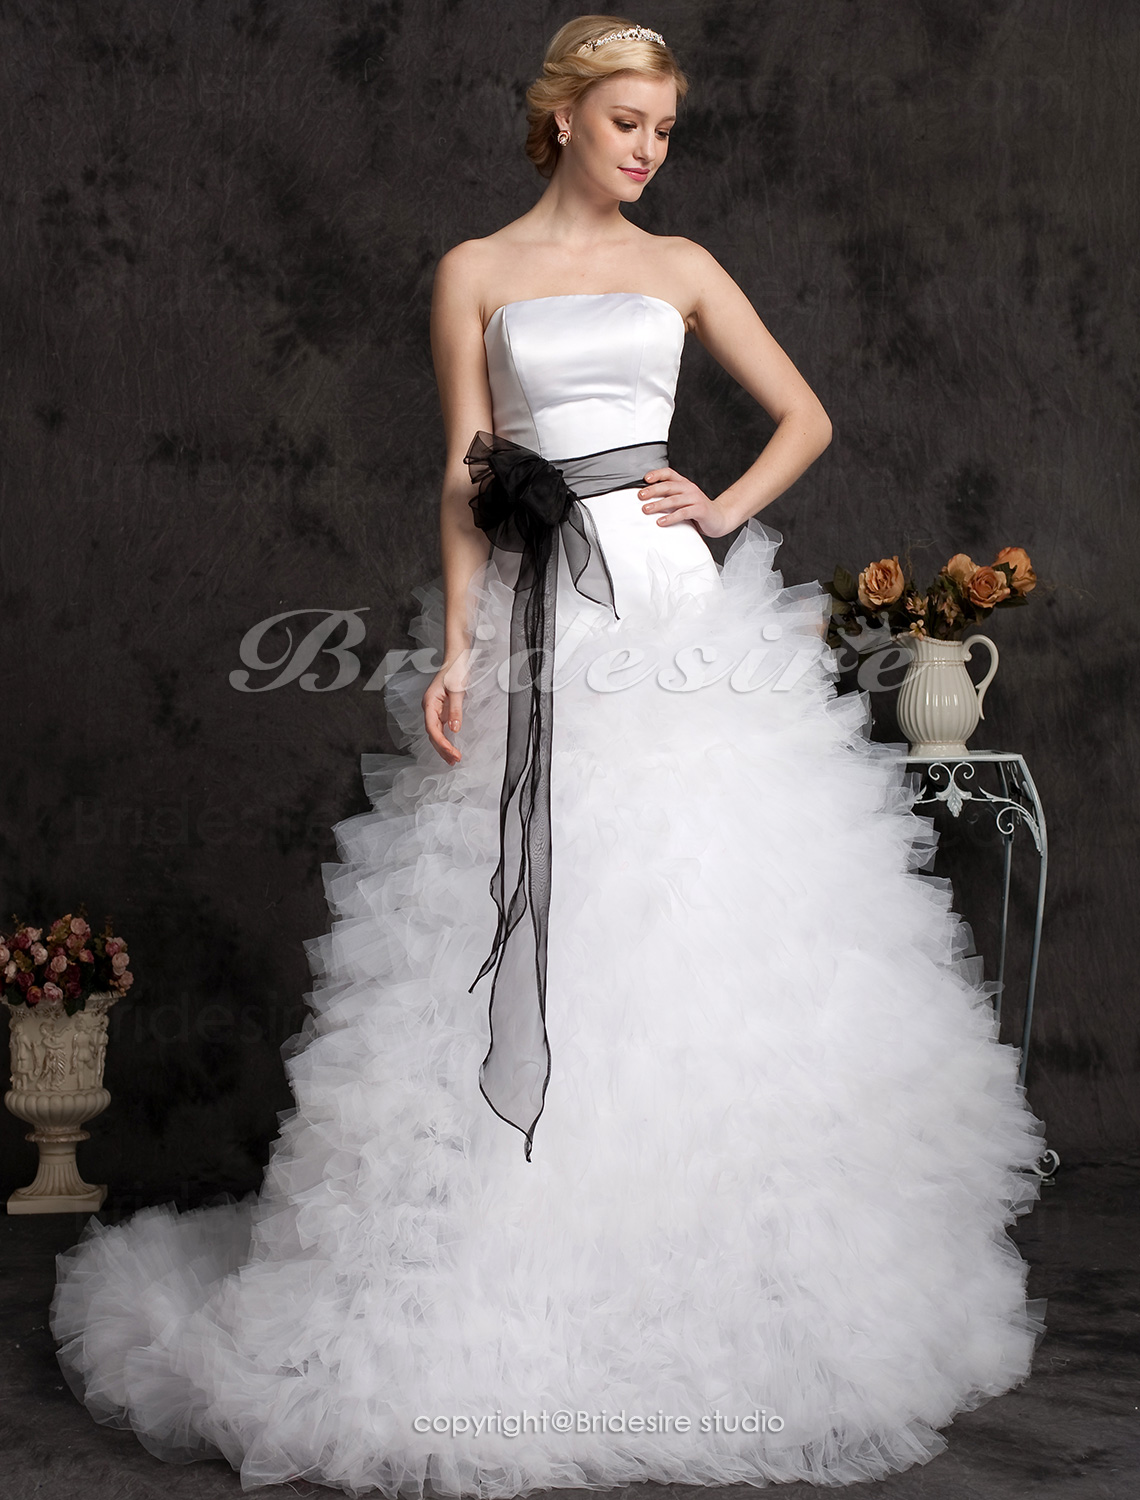 Ball Gown Tulle Court Train Strapless Wedding Dress